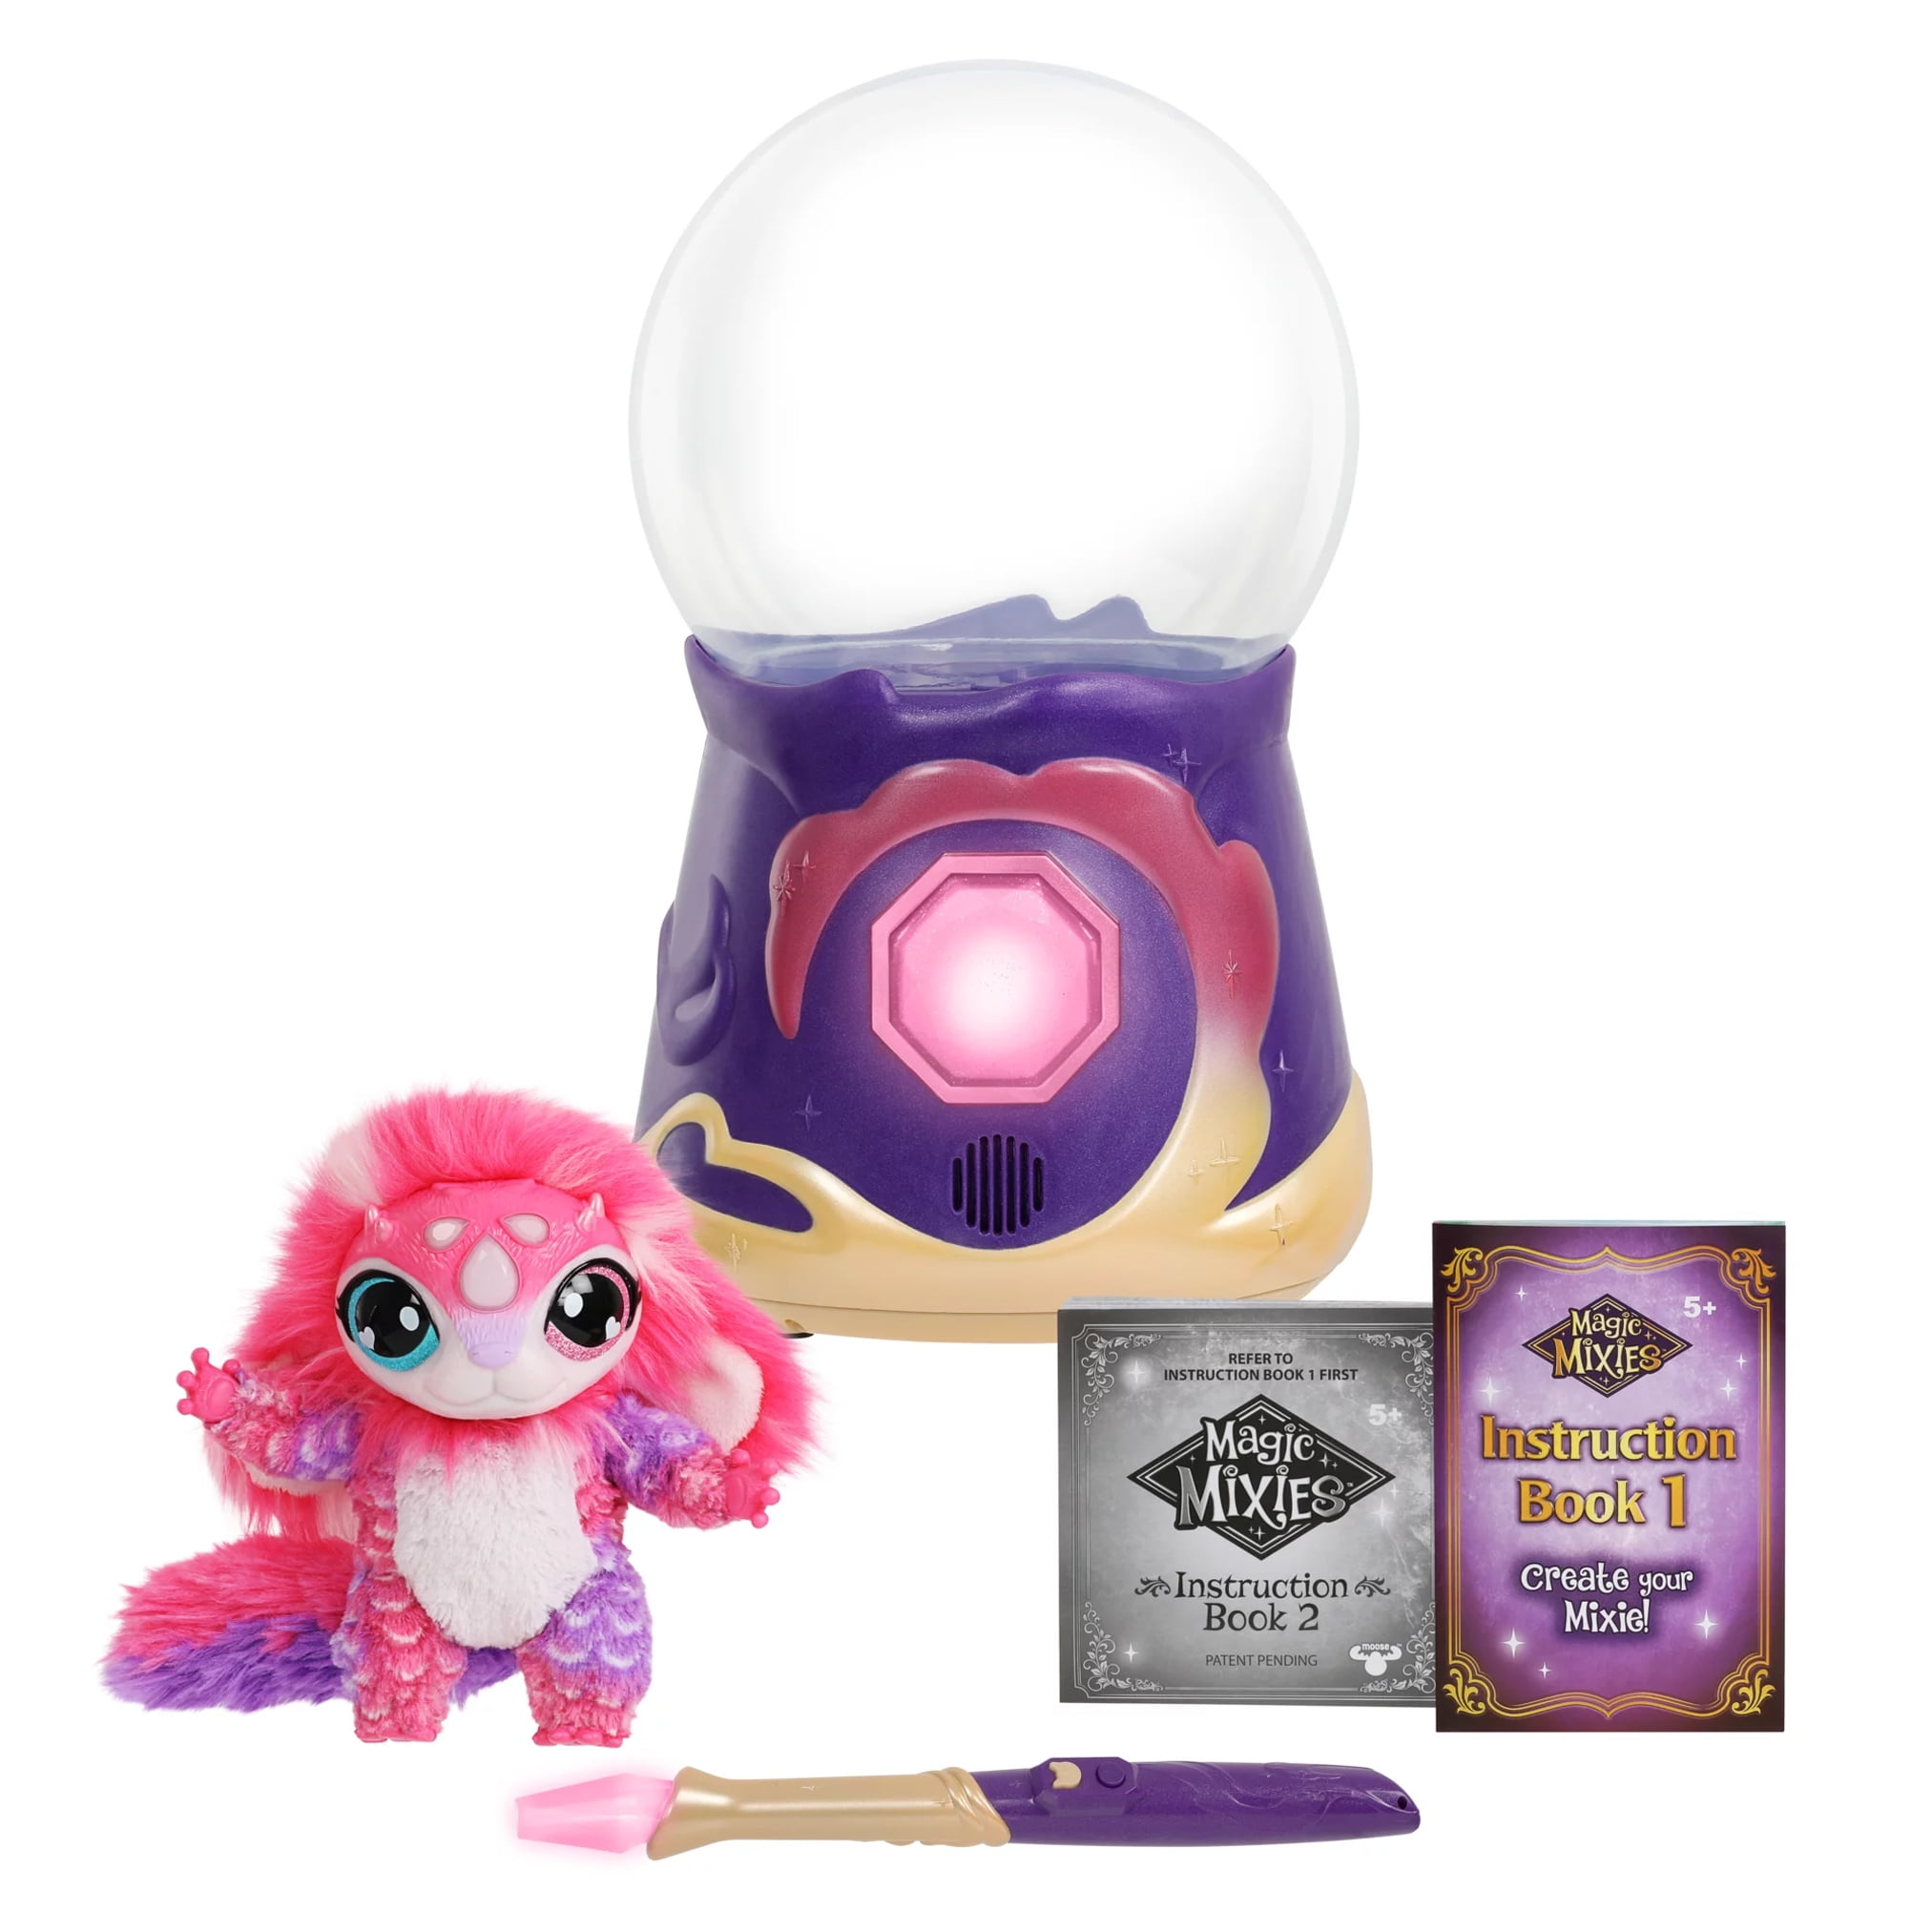 Magic Mixies Magical Misting Crystal Ball with Interactive 8 inch Pink